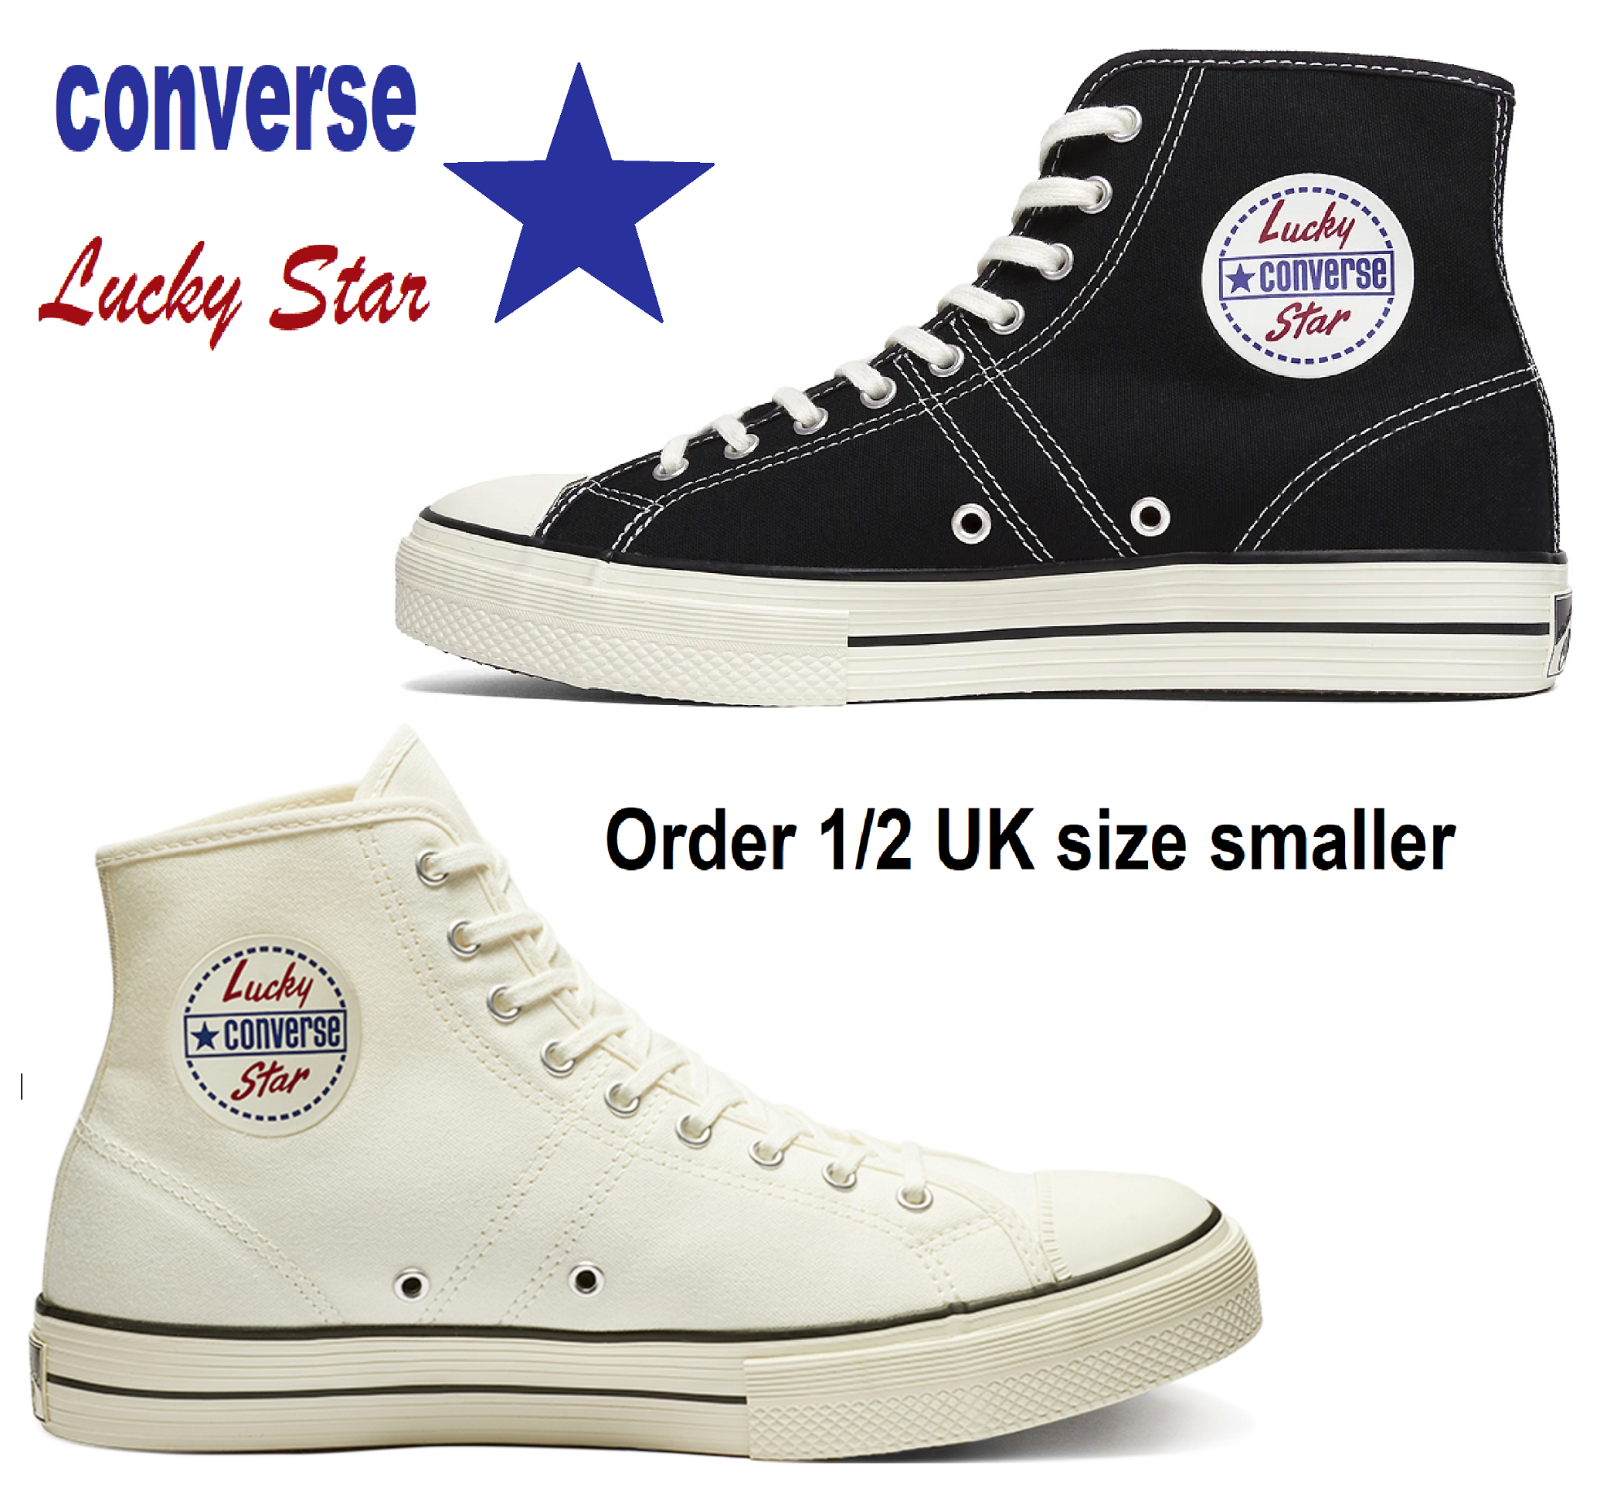 Converse Lucky Star Canvas Hi Top Trainers Black Or Egret - ORDER 1/2 UK  SMALLER